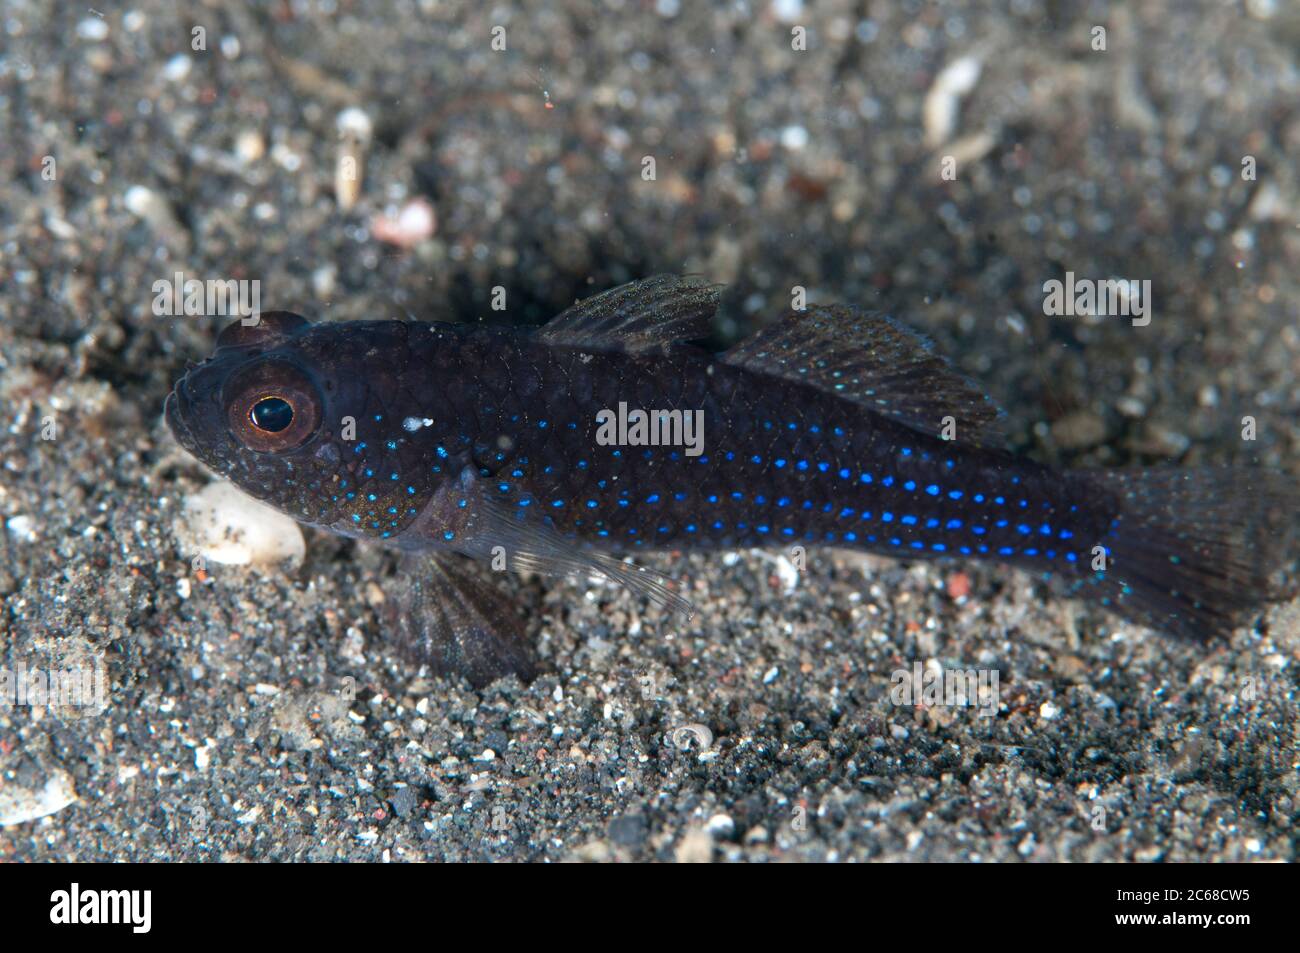 Blackfoot Goby, Asterropteryx atripes, Air Bajo dive site, Lembeh Straits, Sulawesi, Indonesia Stock Photo